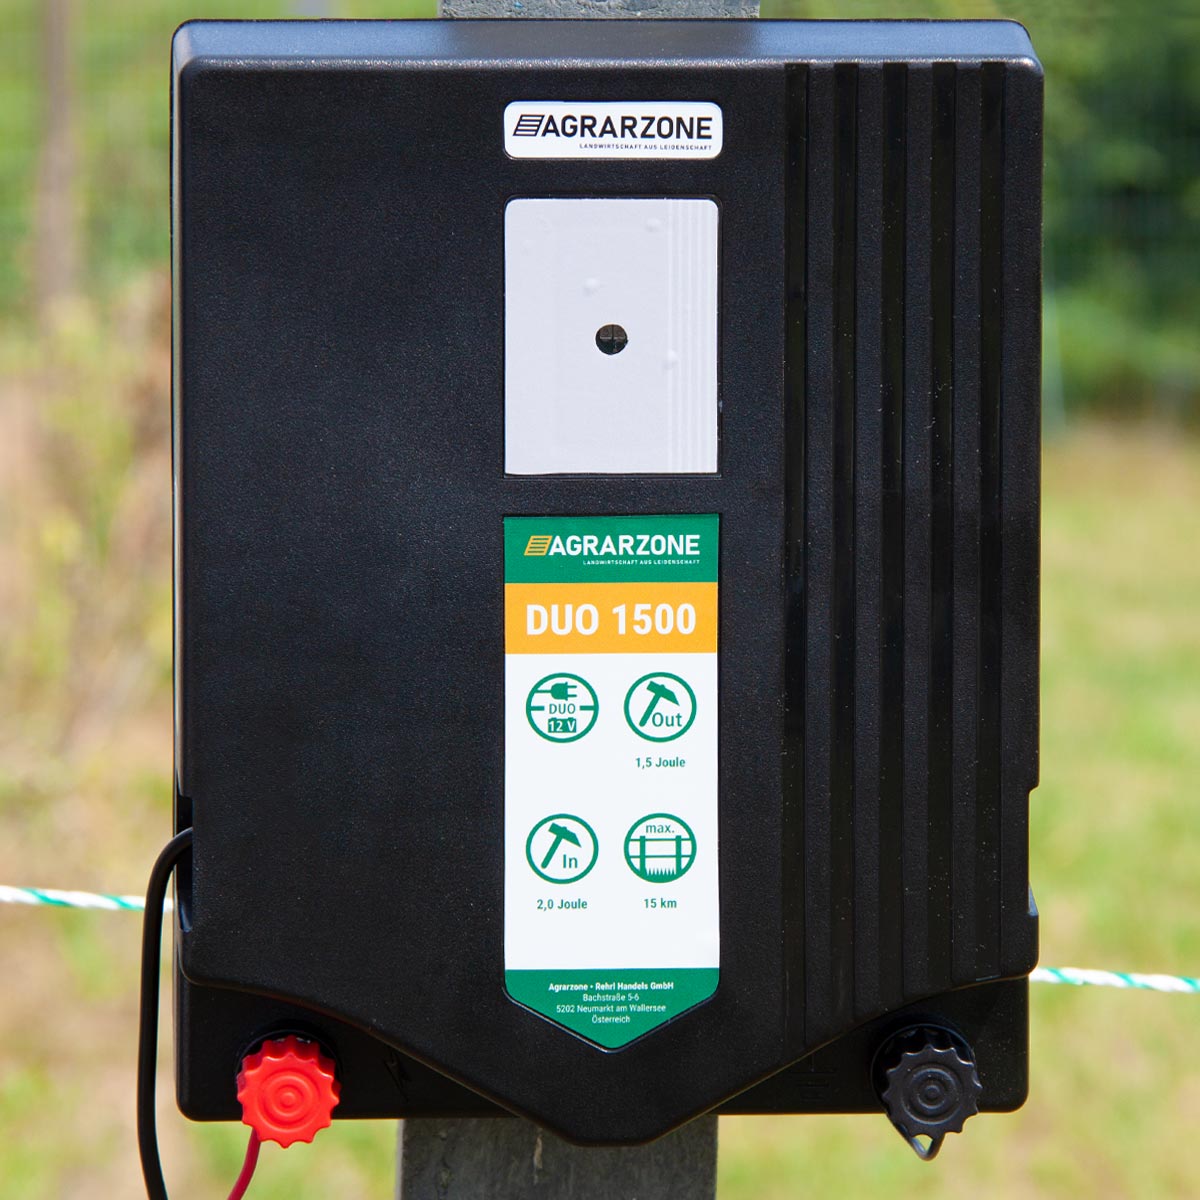 Agrarzone DUO 1500 electric fence energiser 230V / 12V, 2 joules